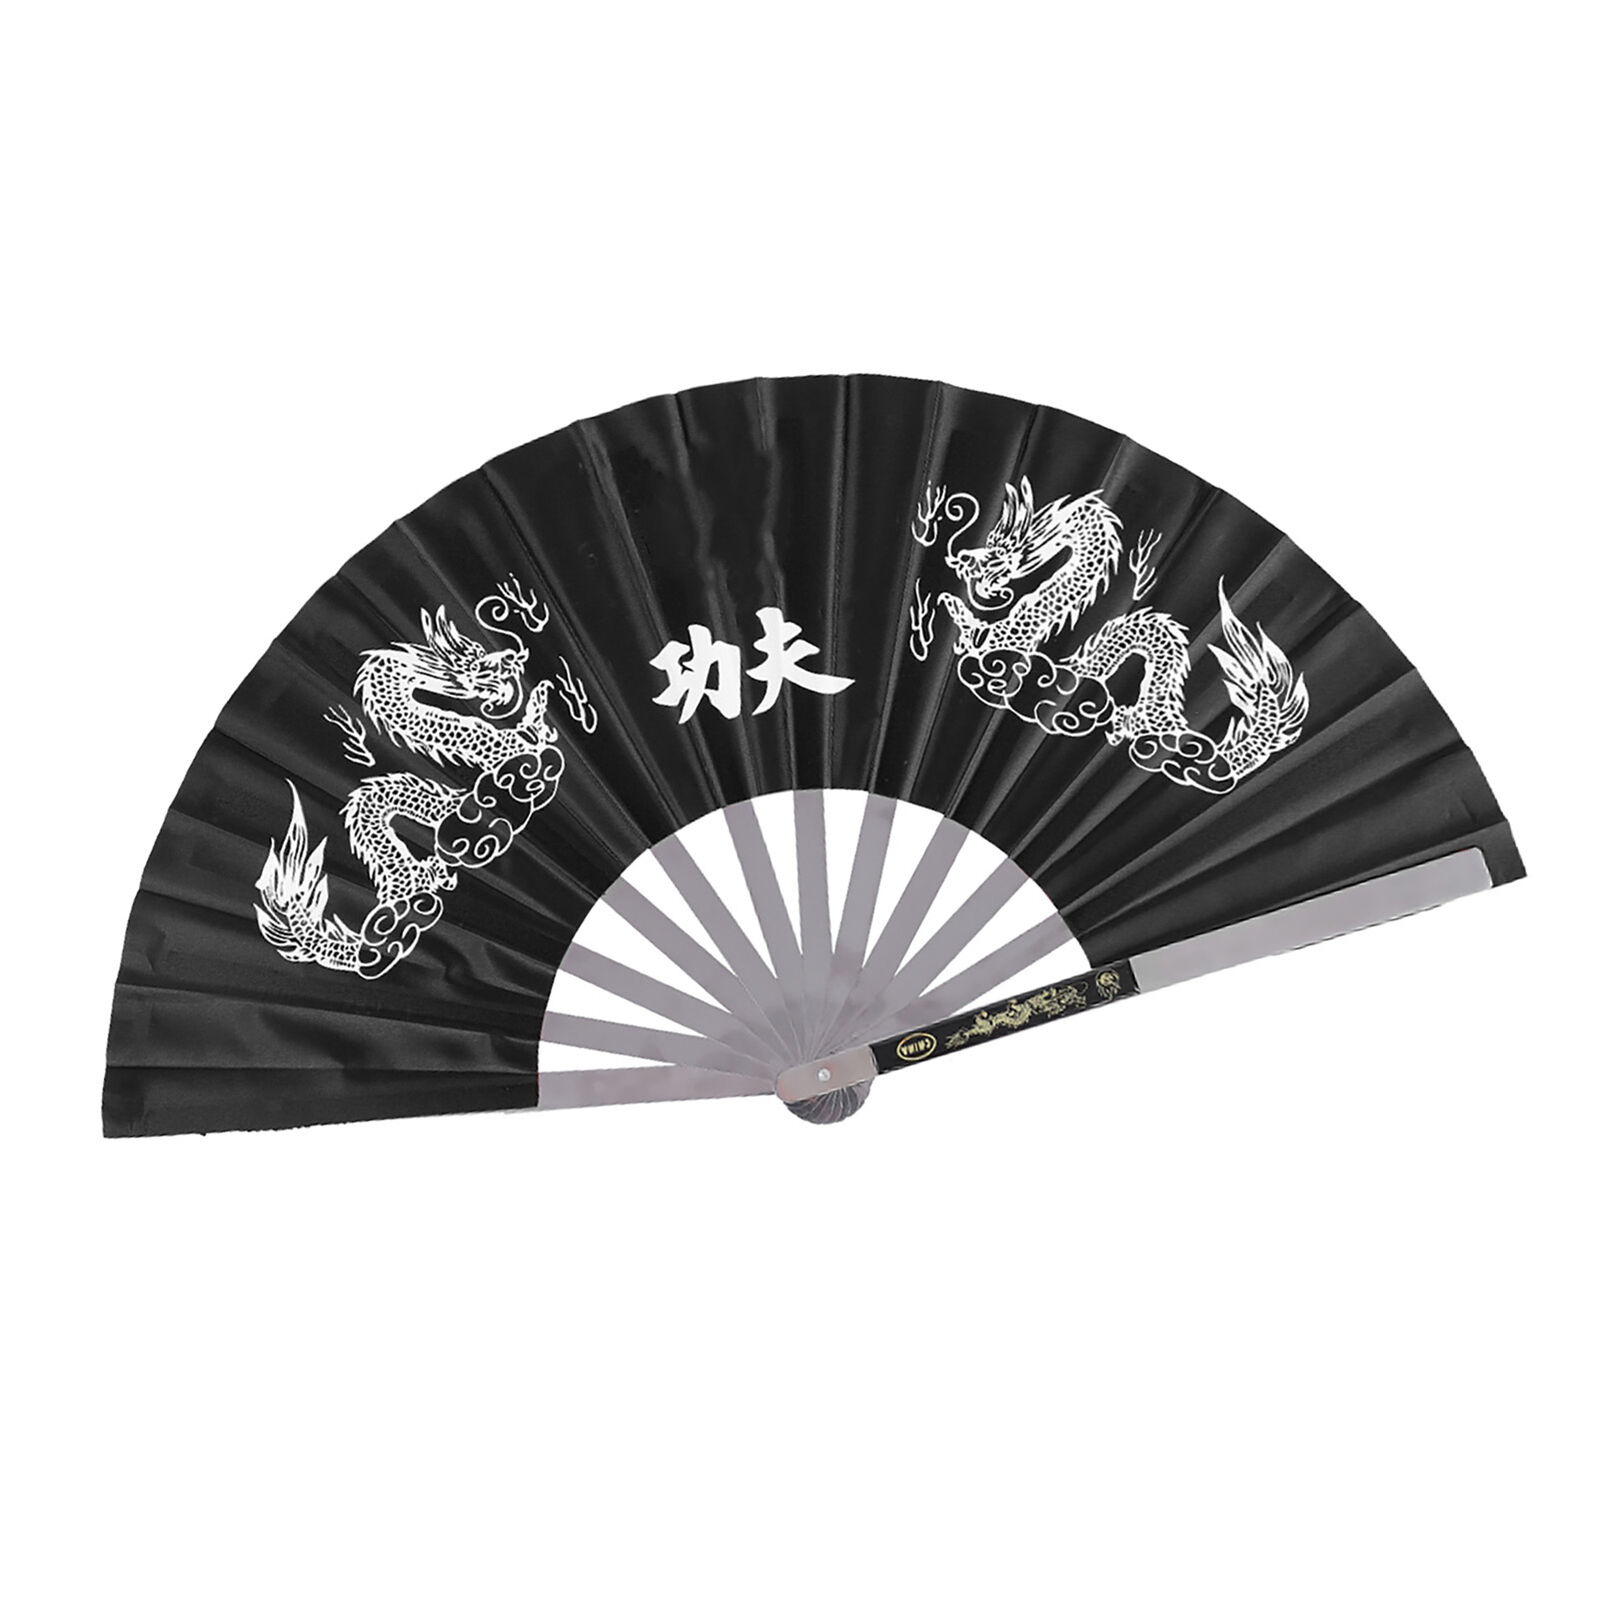 Tai Chi Fan Deluxe And Elegant Chinese Style Design For Sports